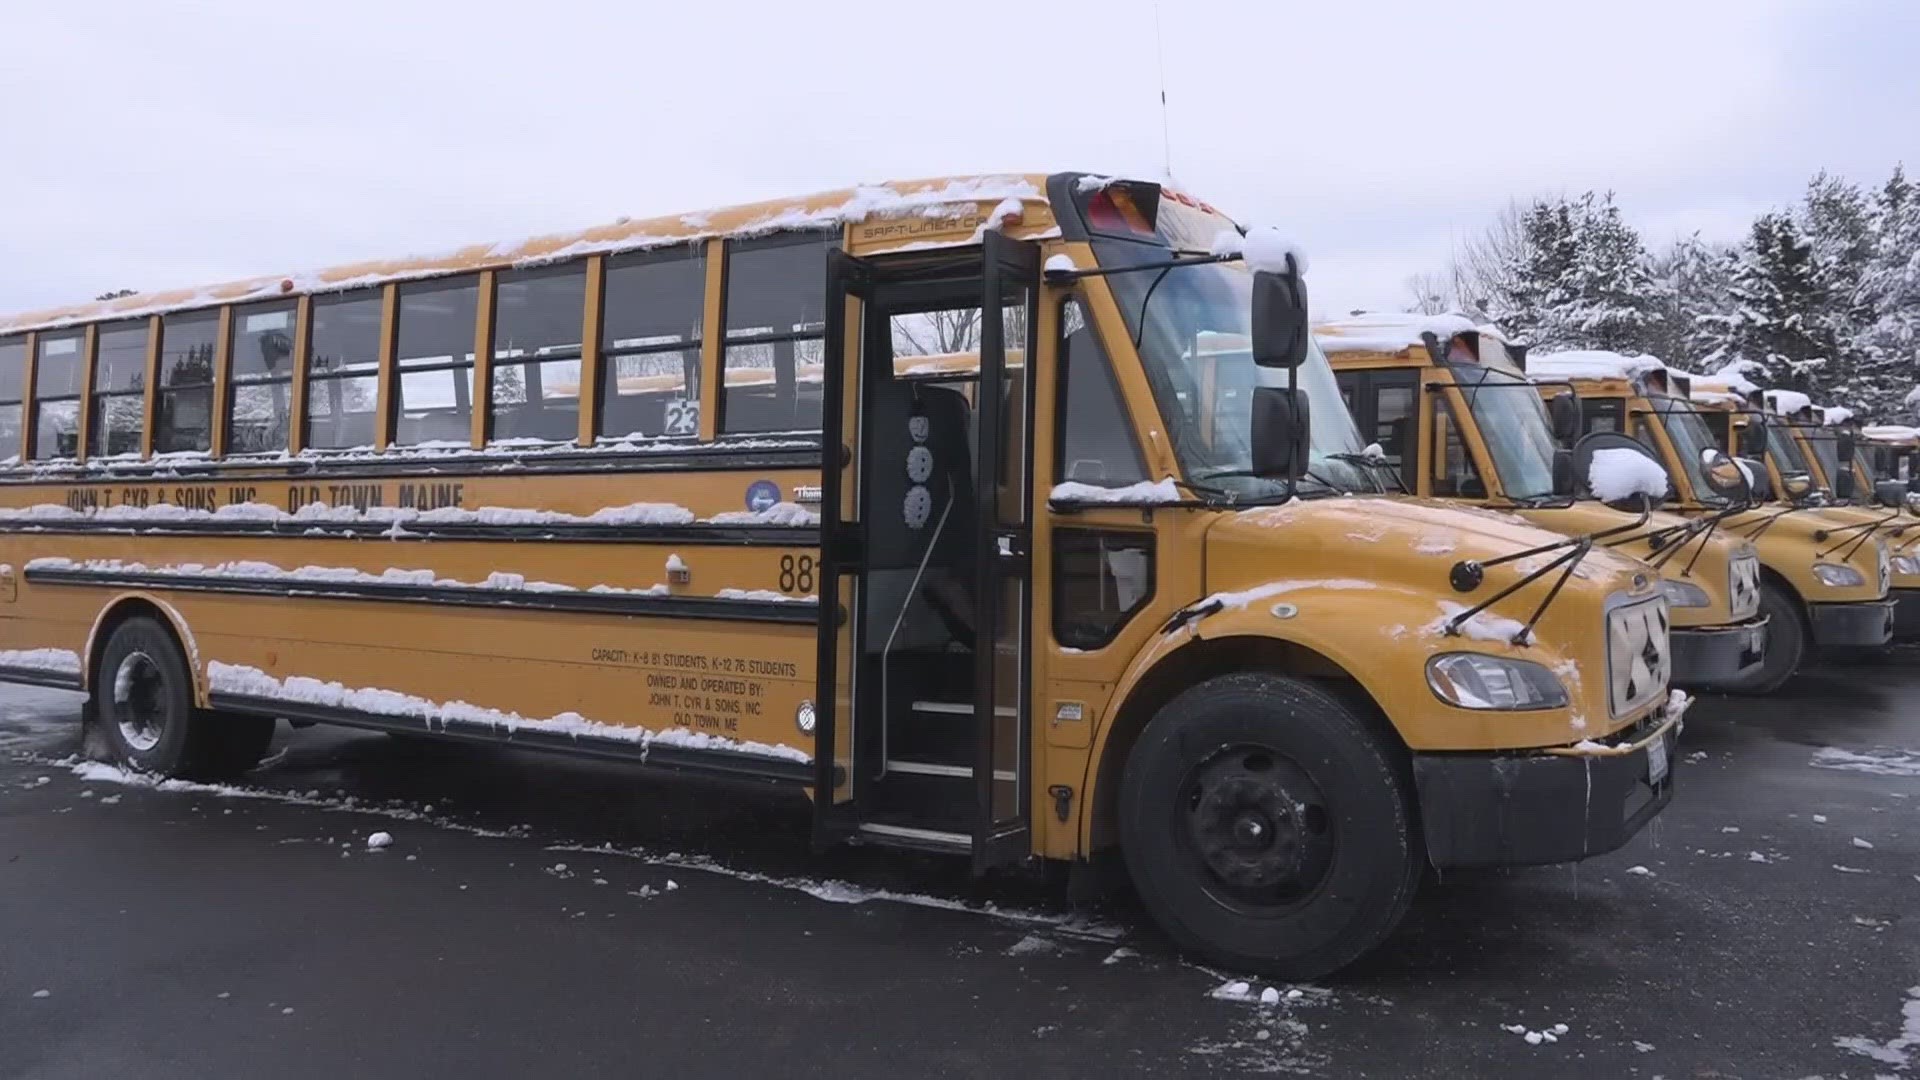 Superintendents say they start communicating with bus companies and public safety officials as early as 3:30 a.m.